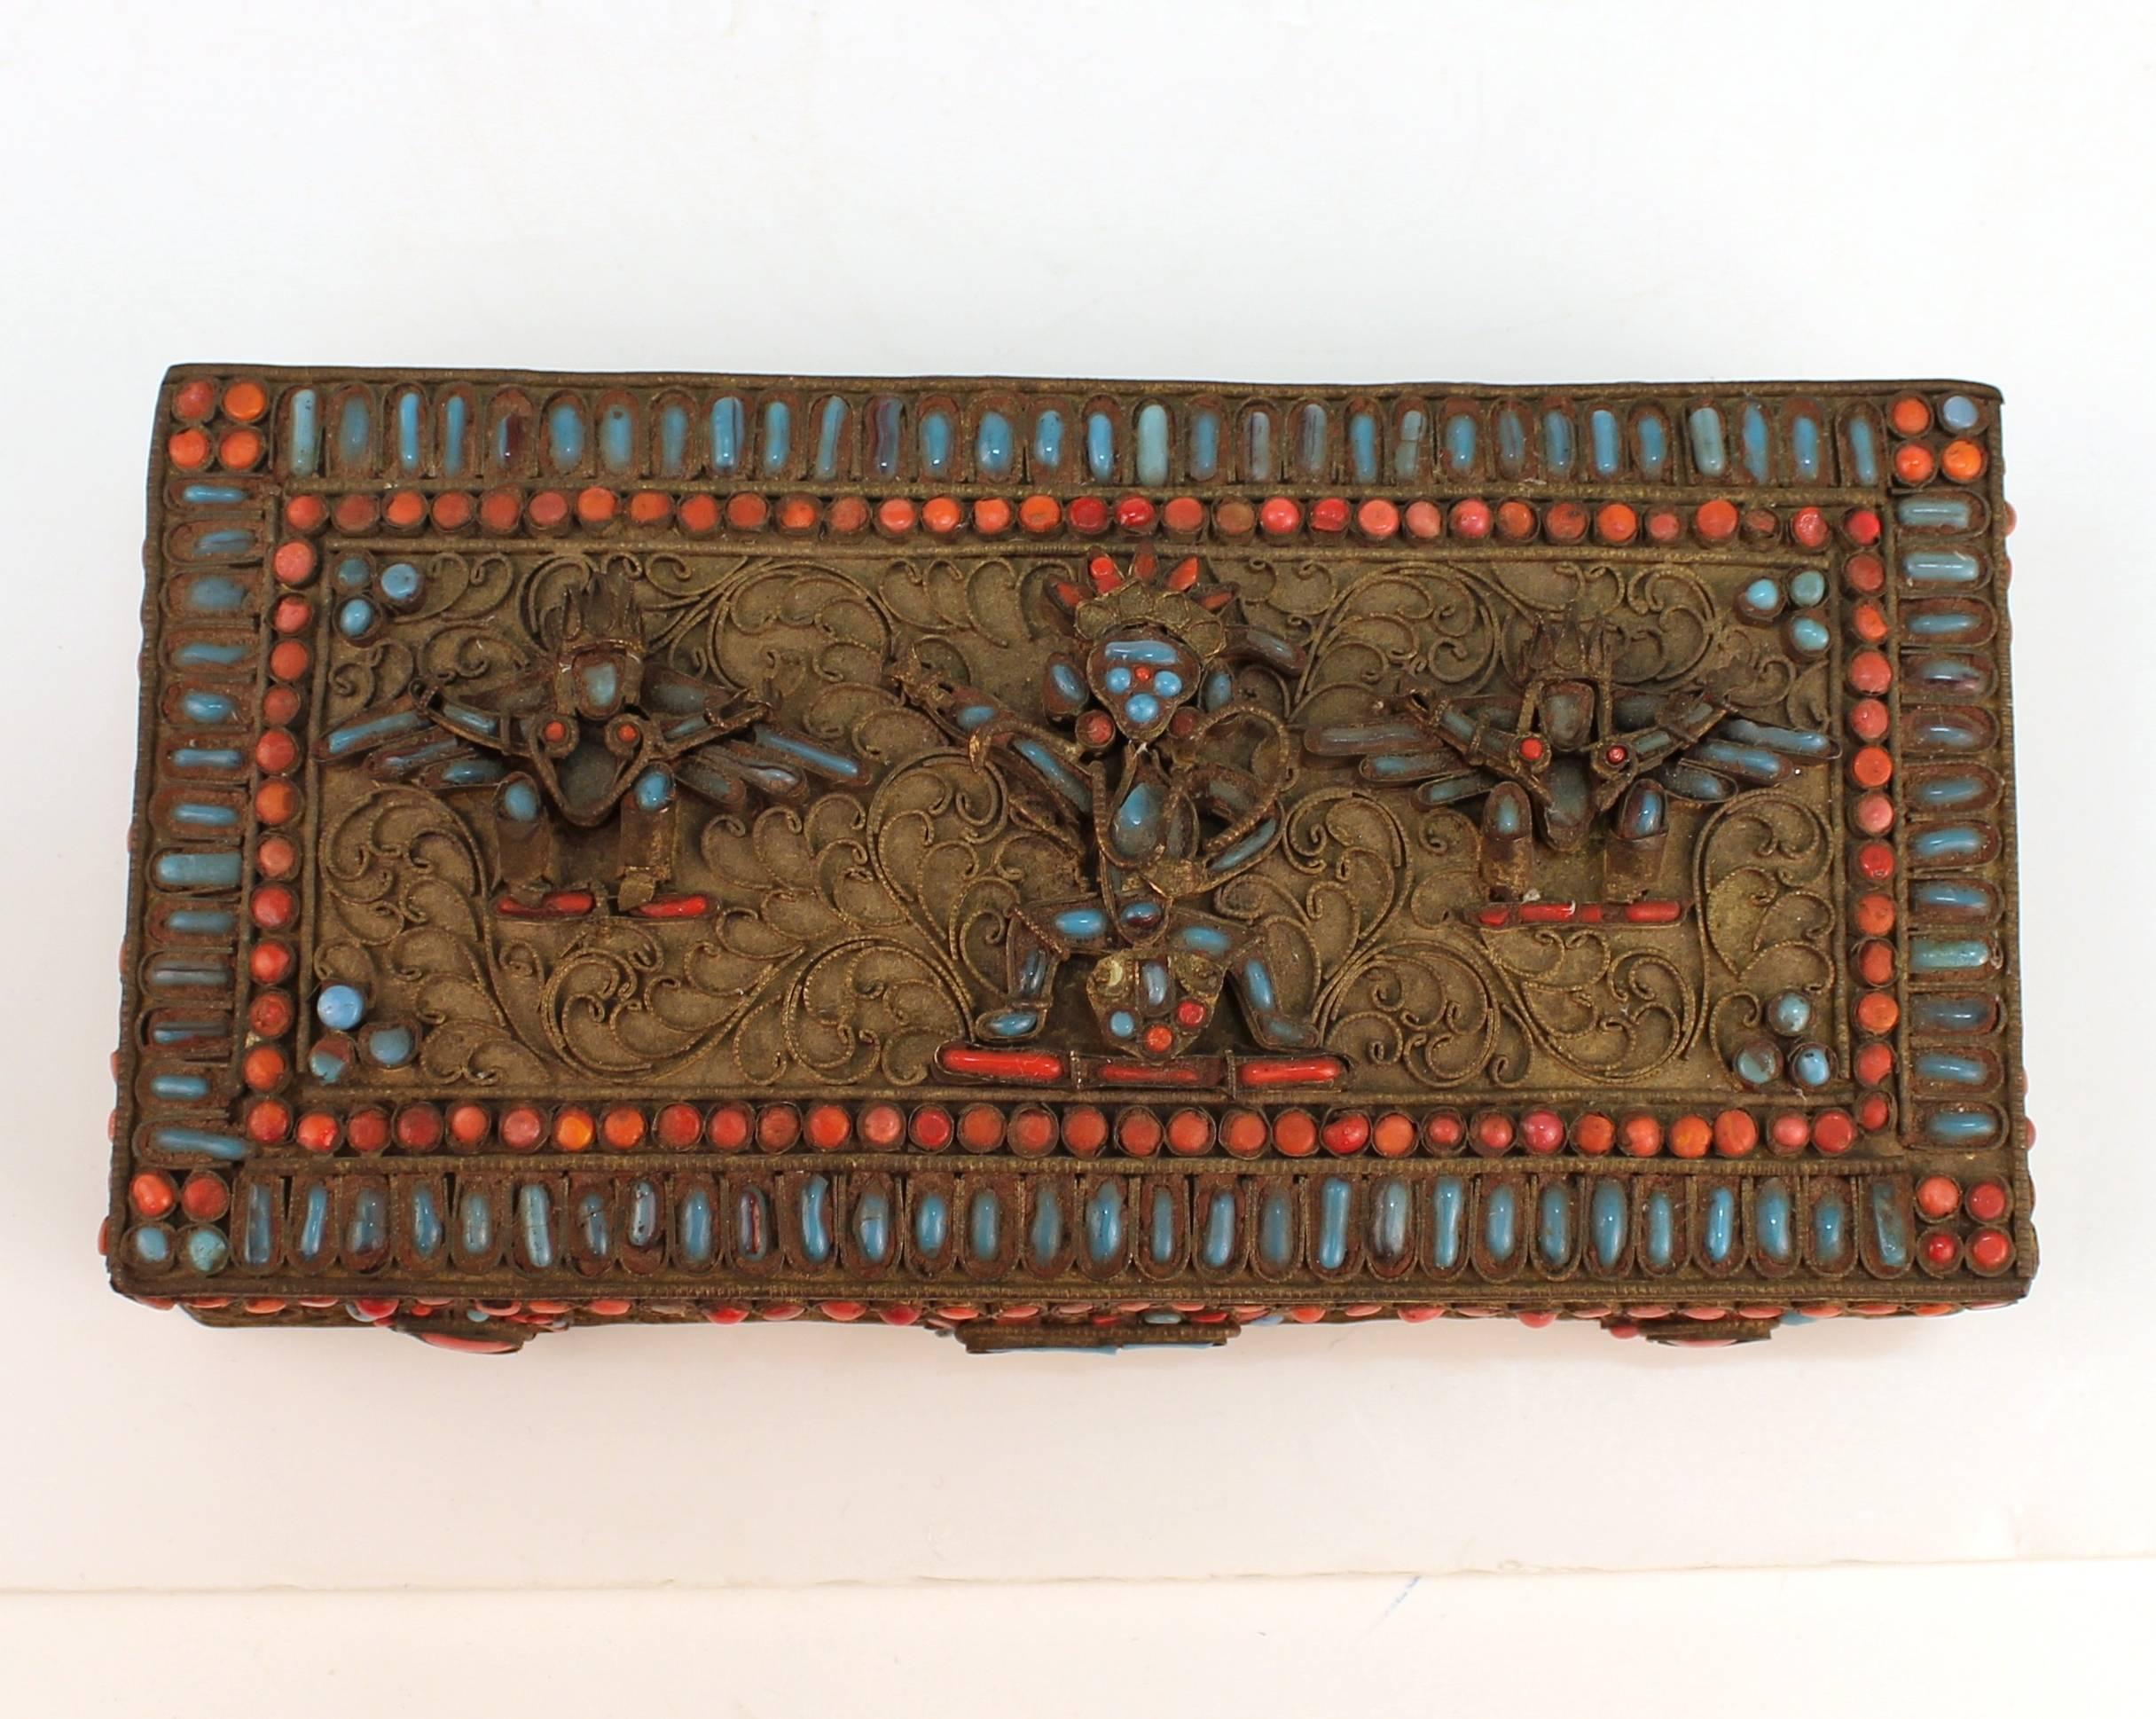 20th Century Chinese-Tibetan Filigree Brass Box with Turquoise and Coral